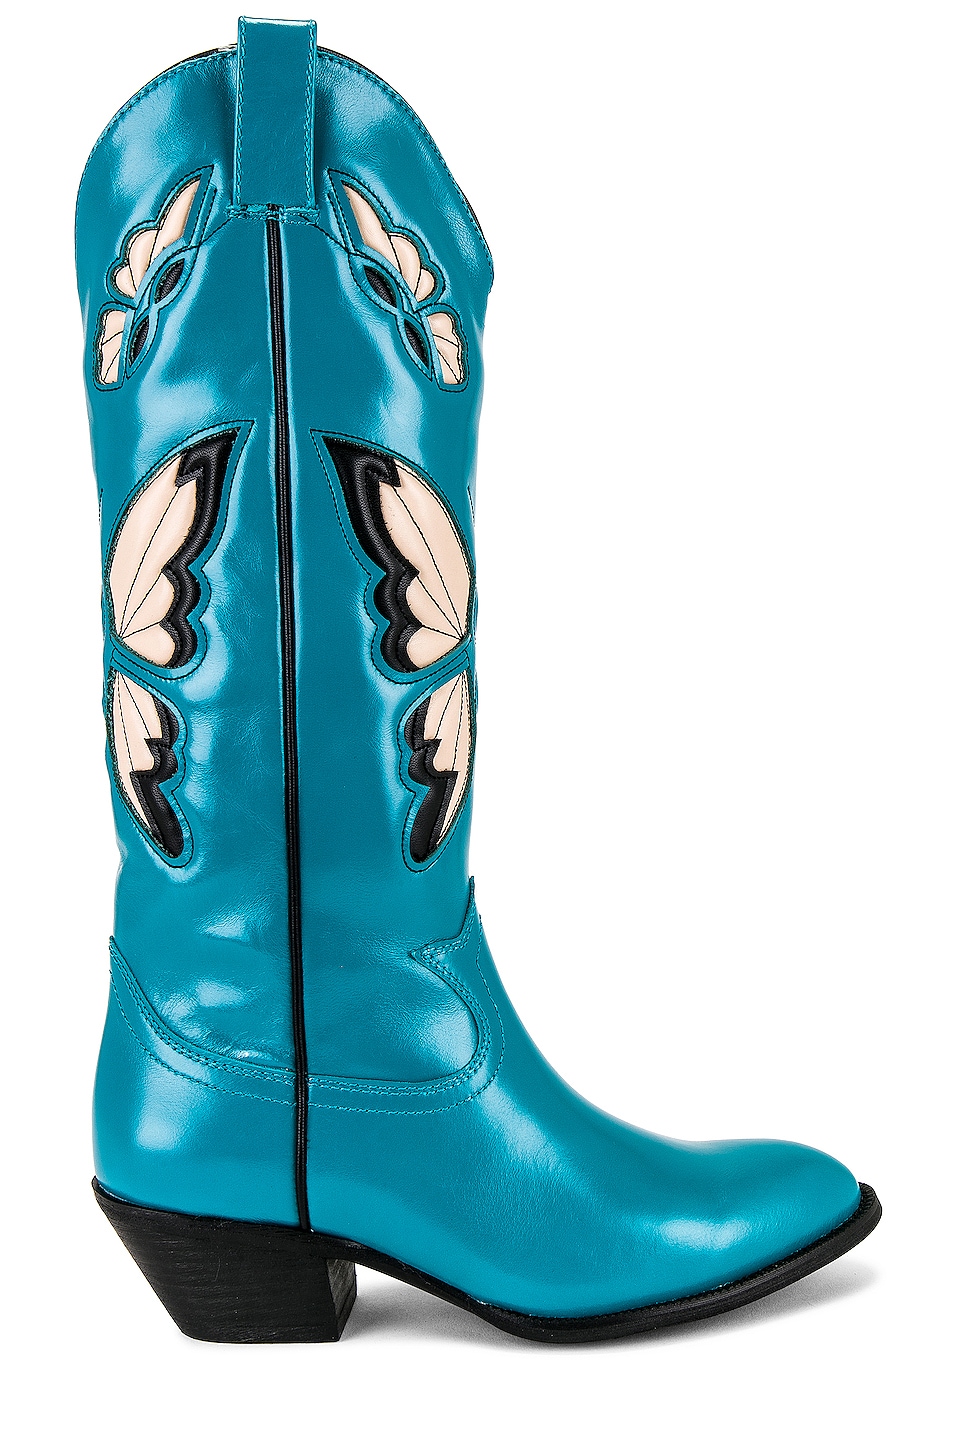 Fly-Away Boot in Teal. Revolve Women Shoes Boots Heeled Boots 